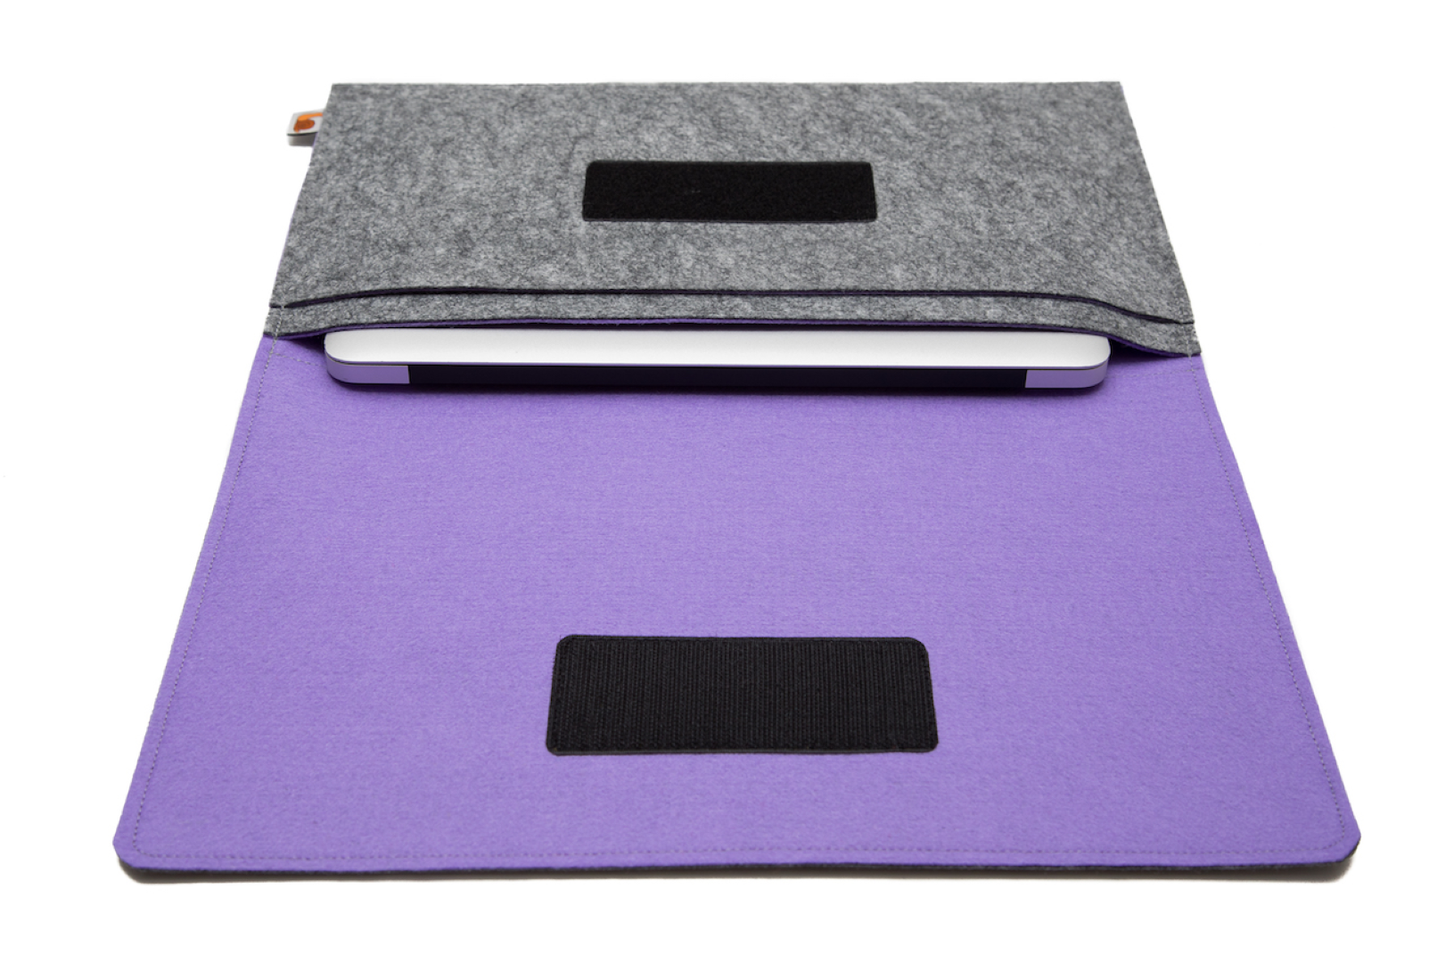 Handmade MacBook Cover with Accessories Pocket: Grey & Purple